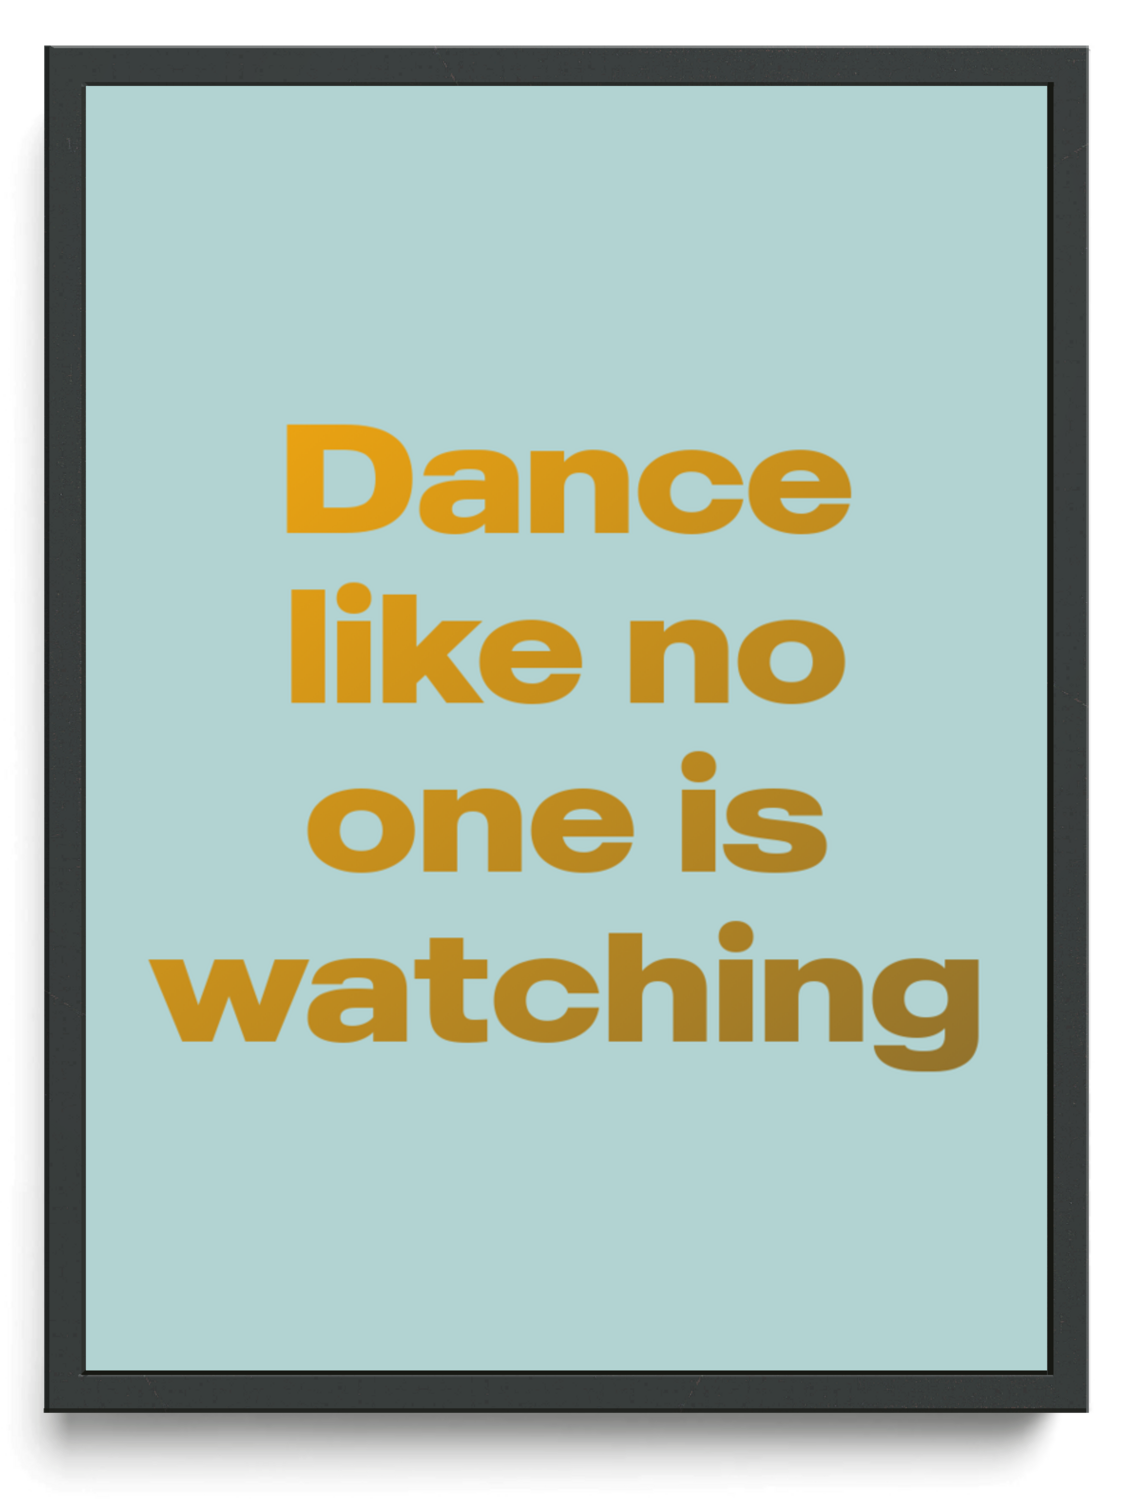 Dance like no one is watching framed typographic print